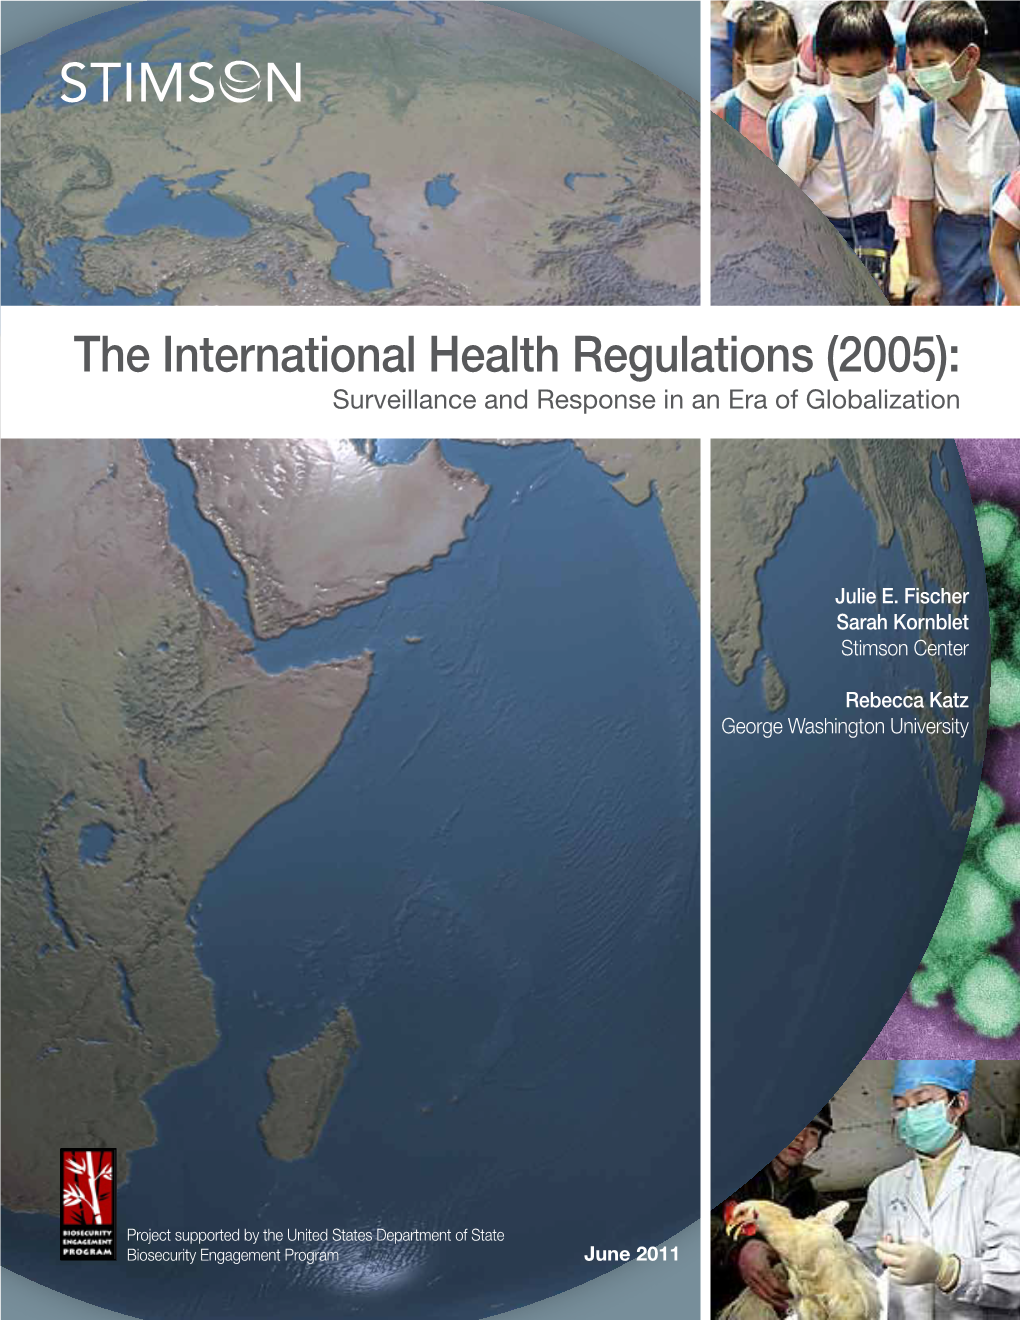 The International Health Regulations (2005): Surveillance and Response in an Era of Globalization